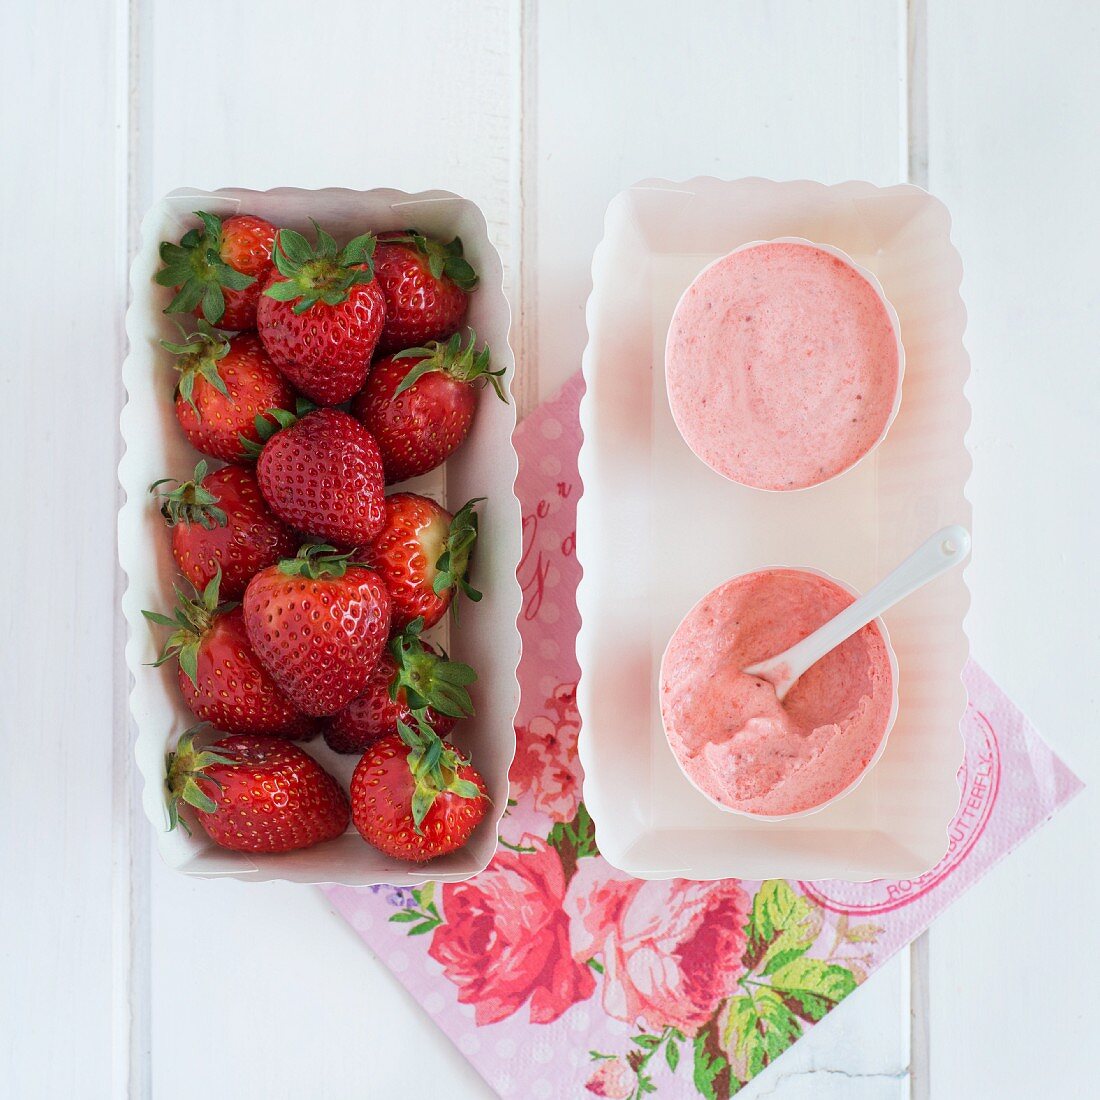 Strawberry mousse and fresh strawberries